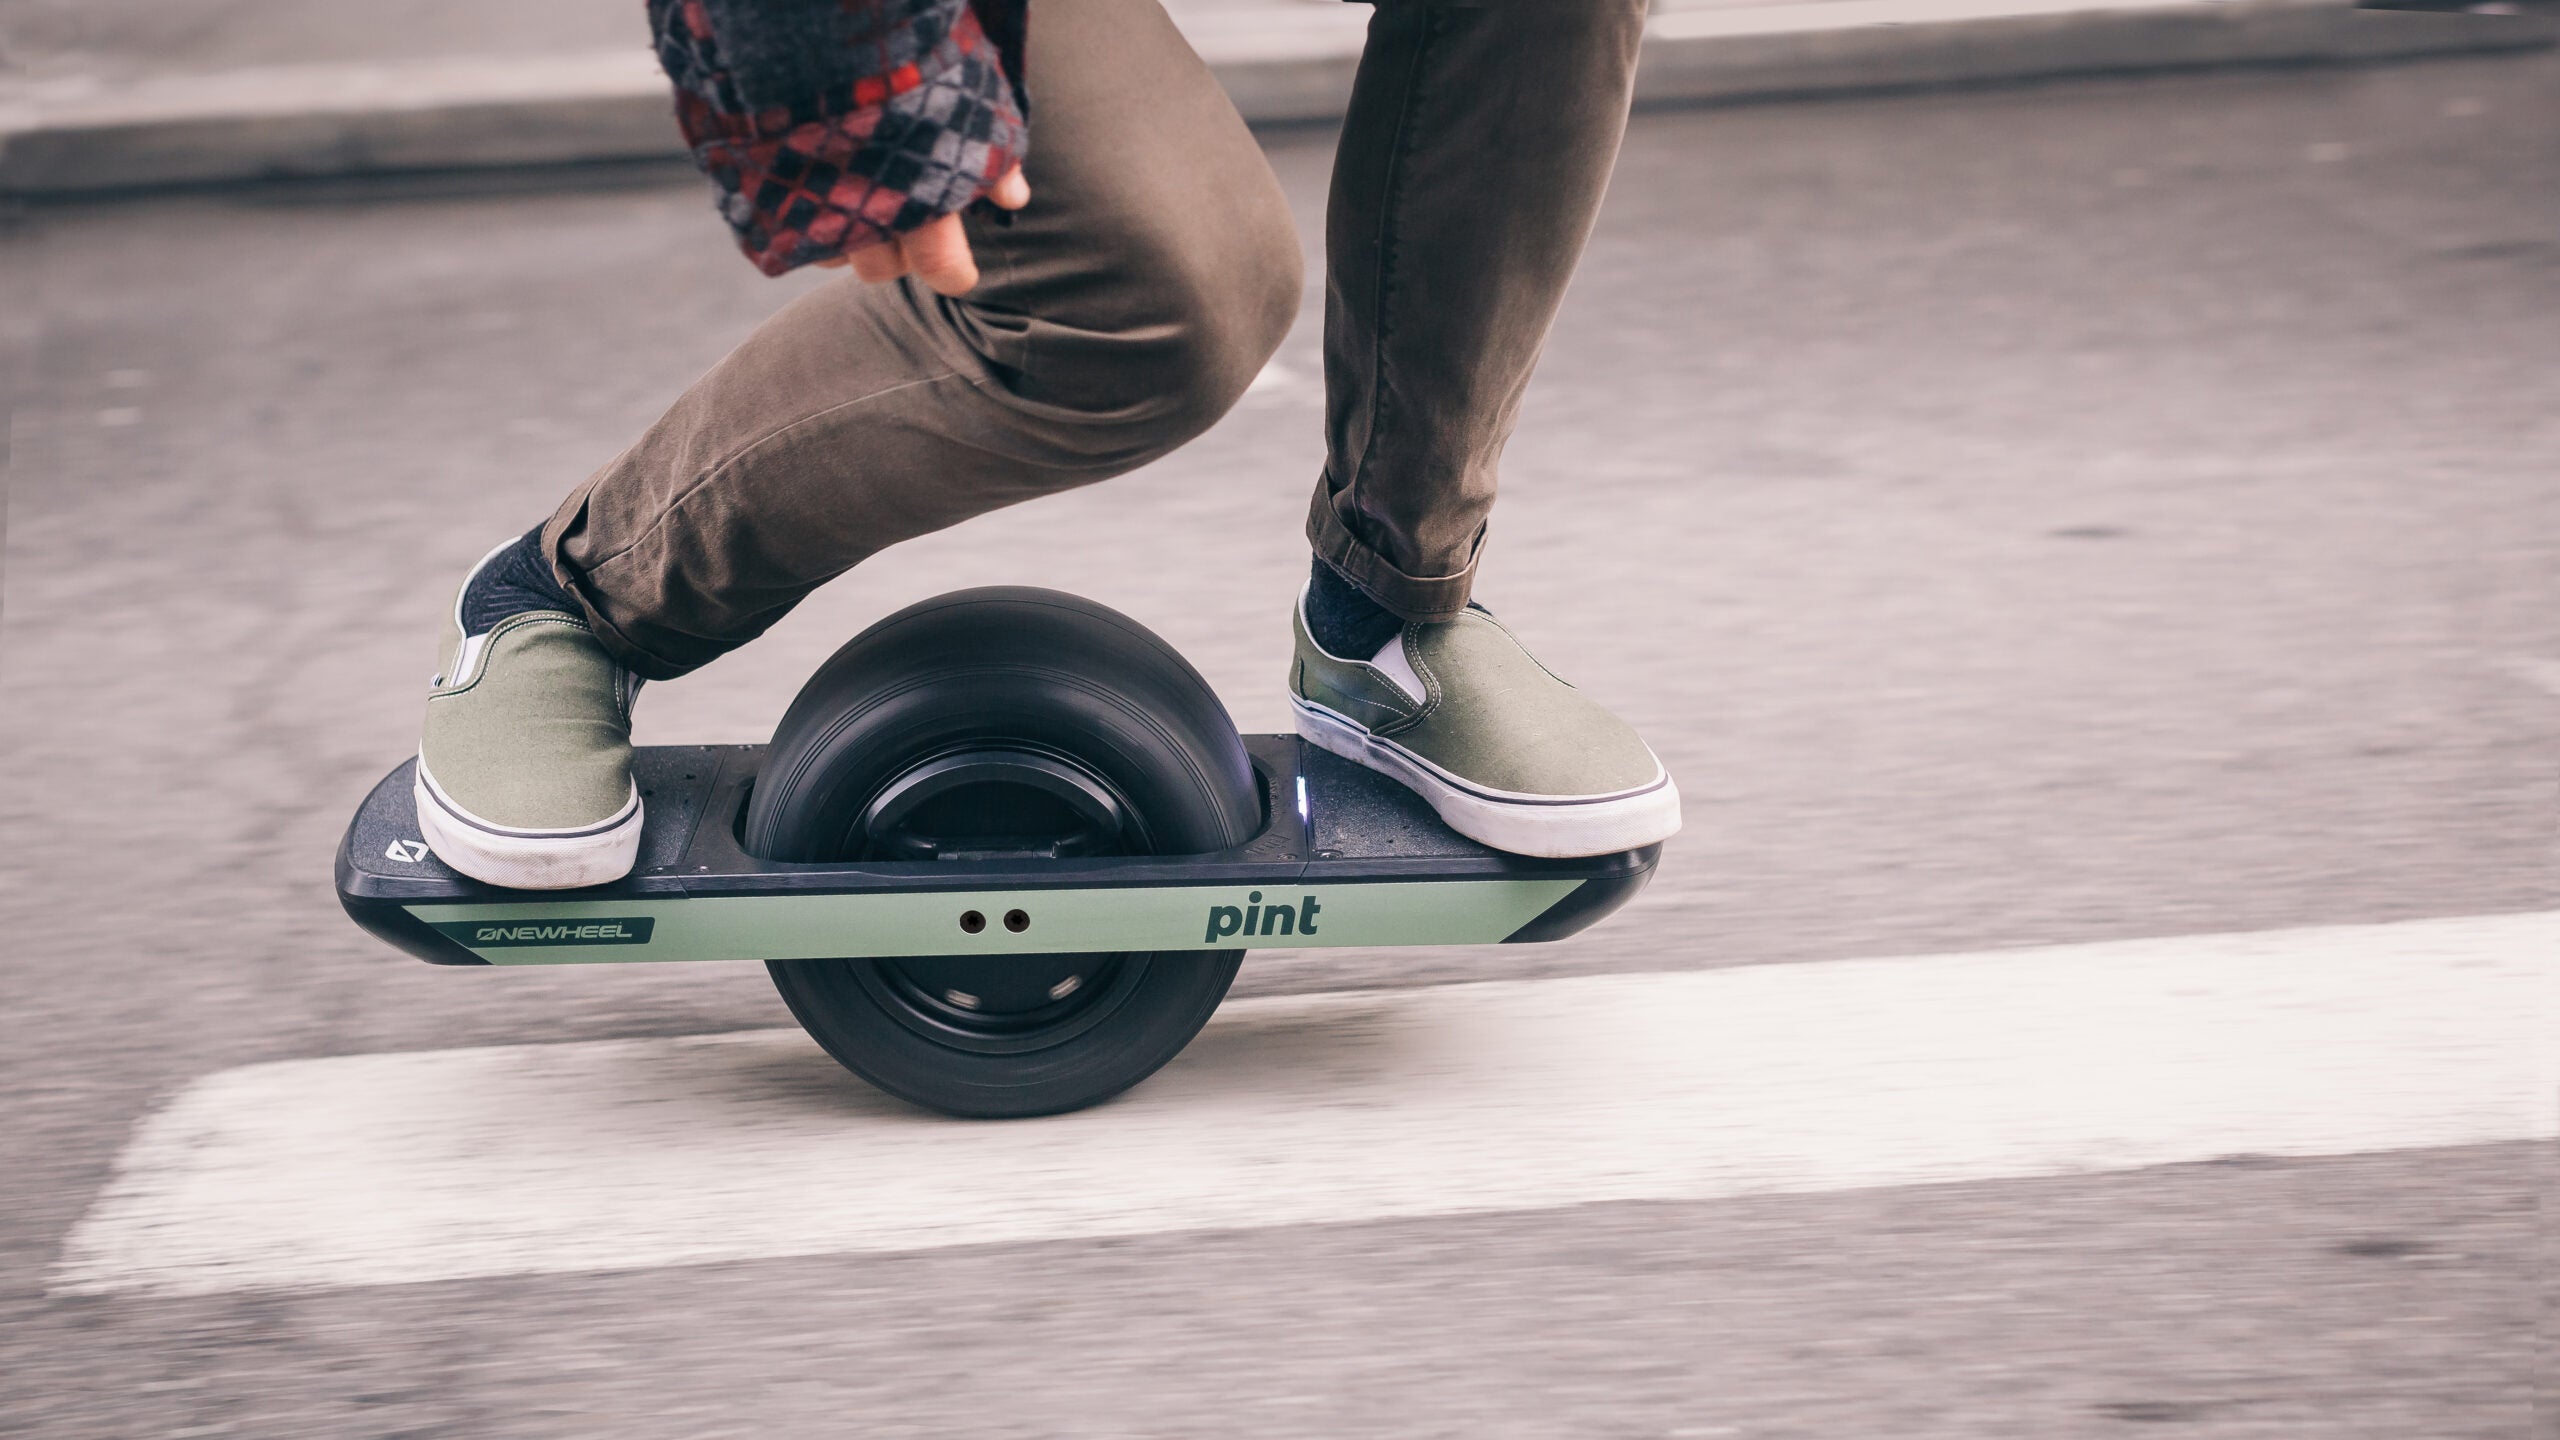 Article about What are the skateboards with one big wheel